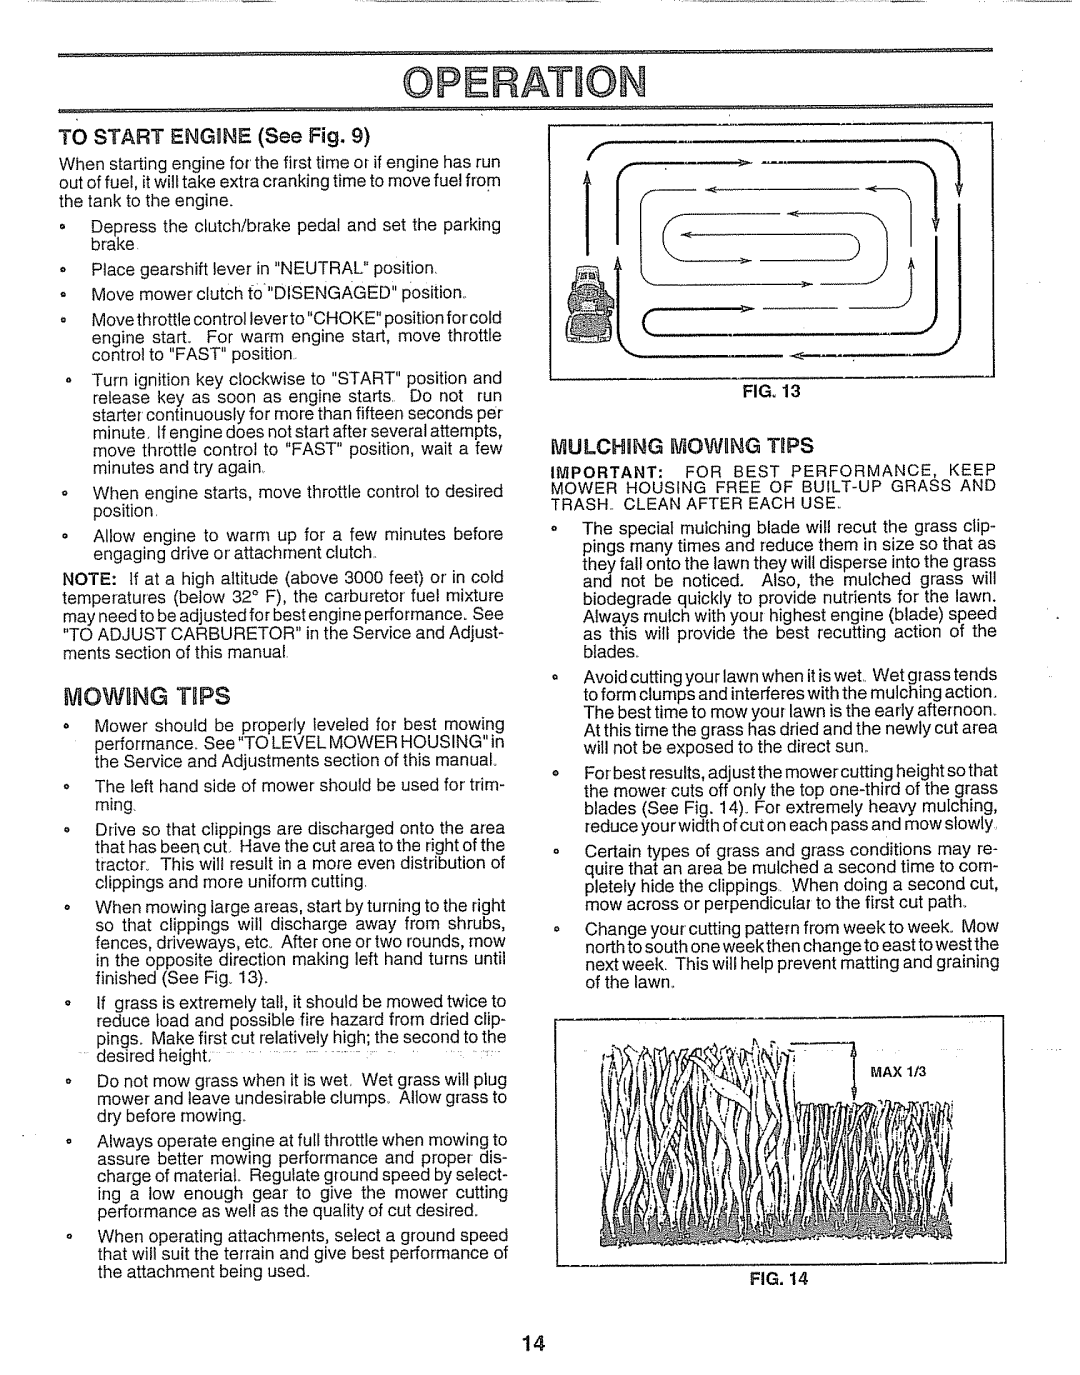 Craftsman 917.25693 owner manual MOWtNG TRPS, TO START ENGBNE See Fig, Mulching Mowhng Tbps 